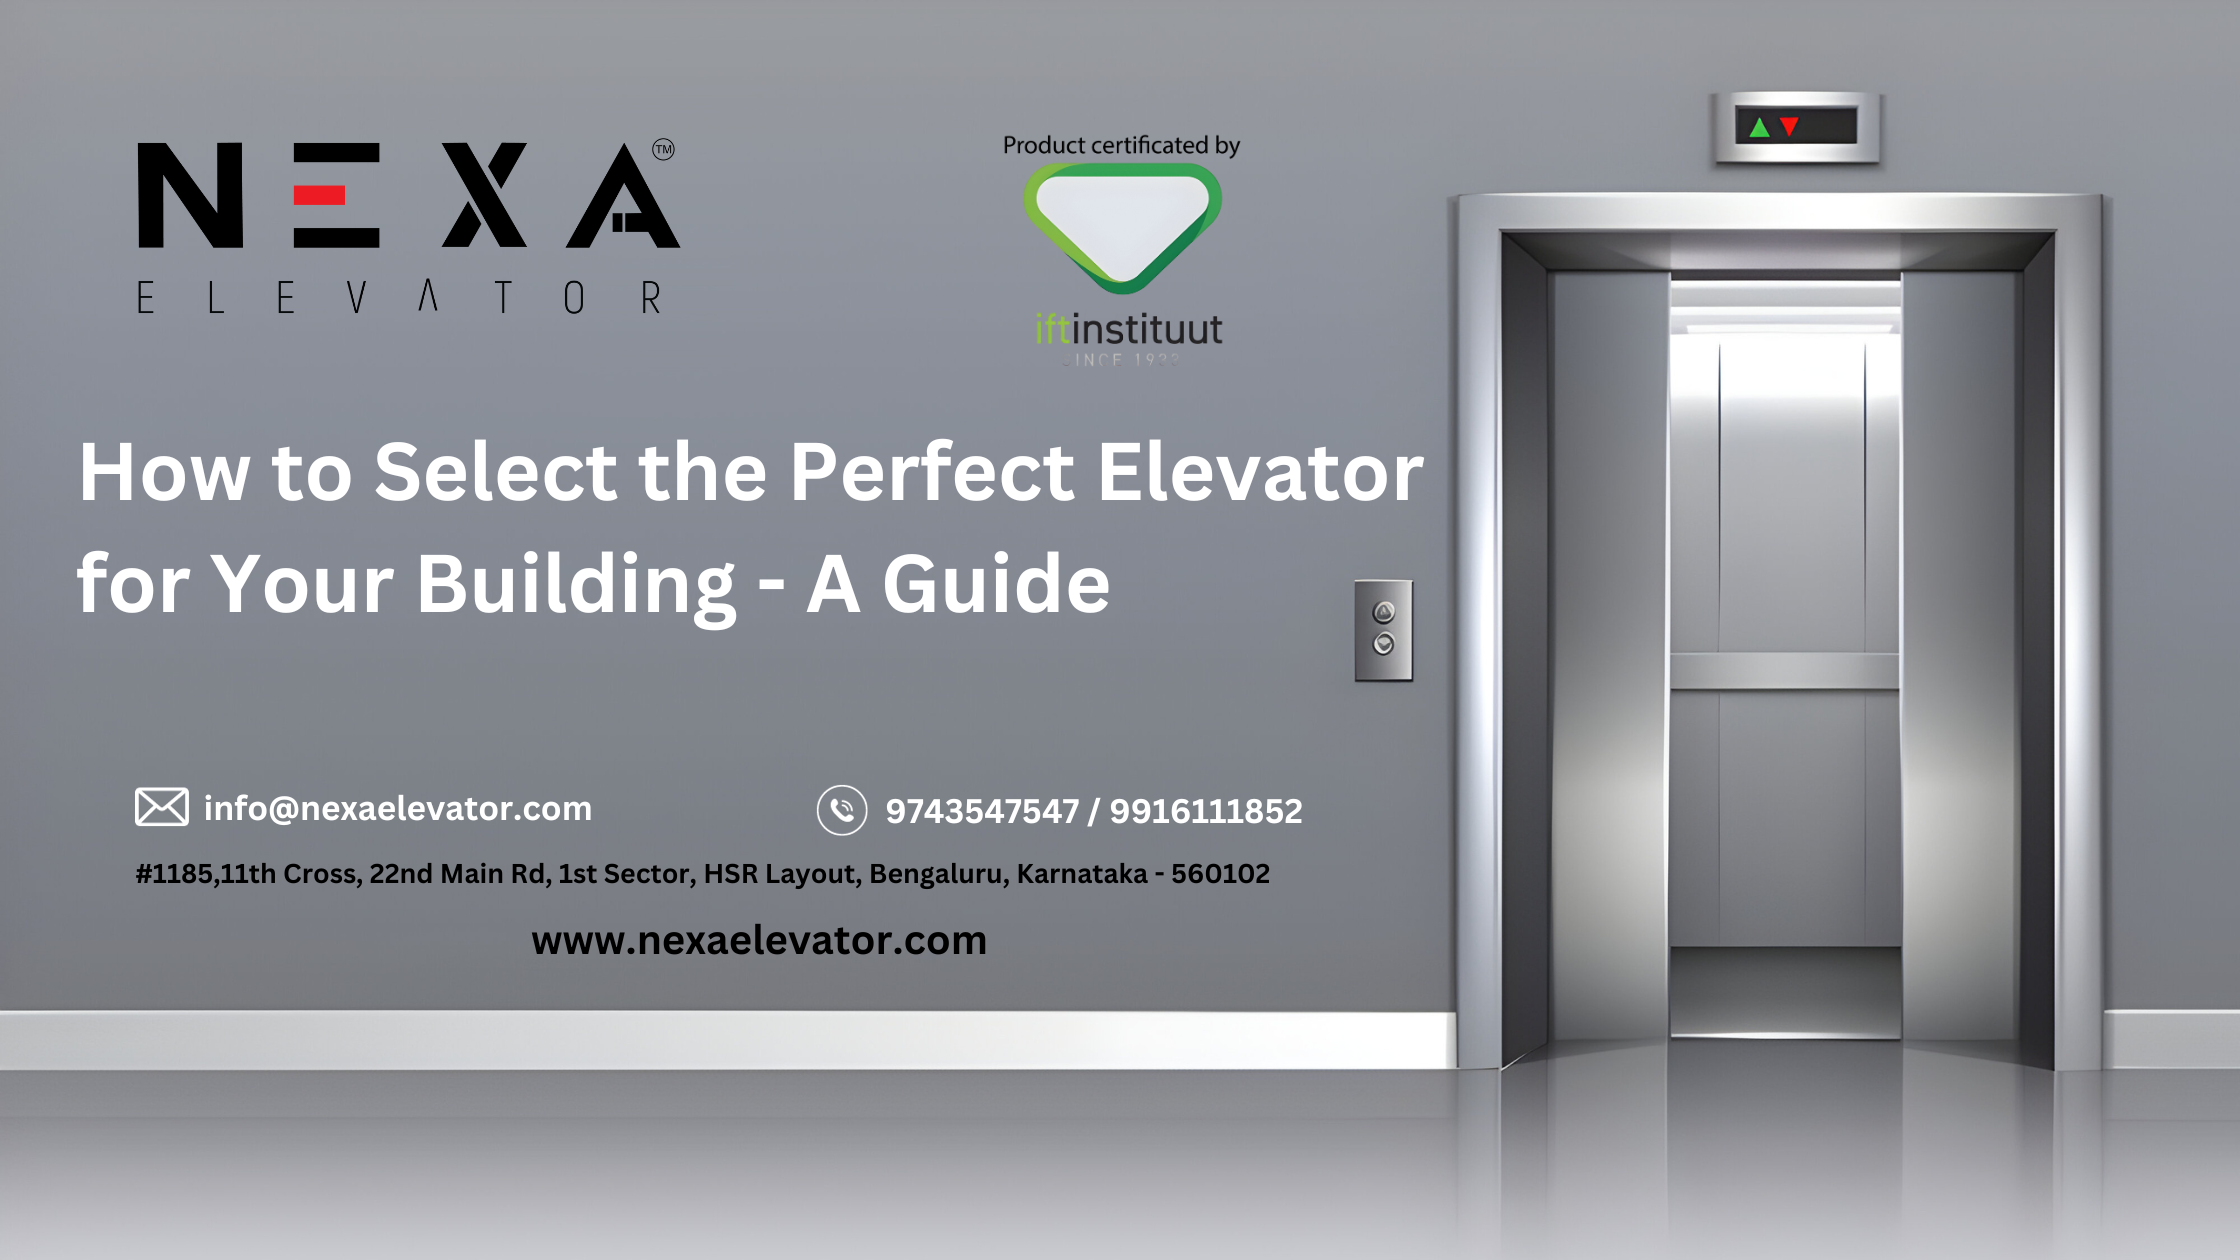 How to Select the Perfect Elevator for Your Building - A Guide